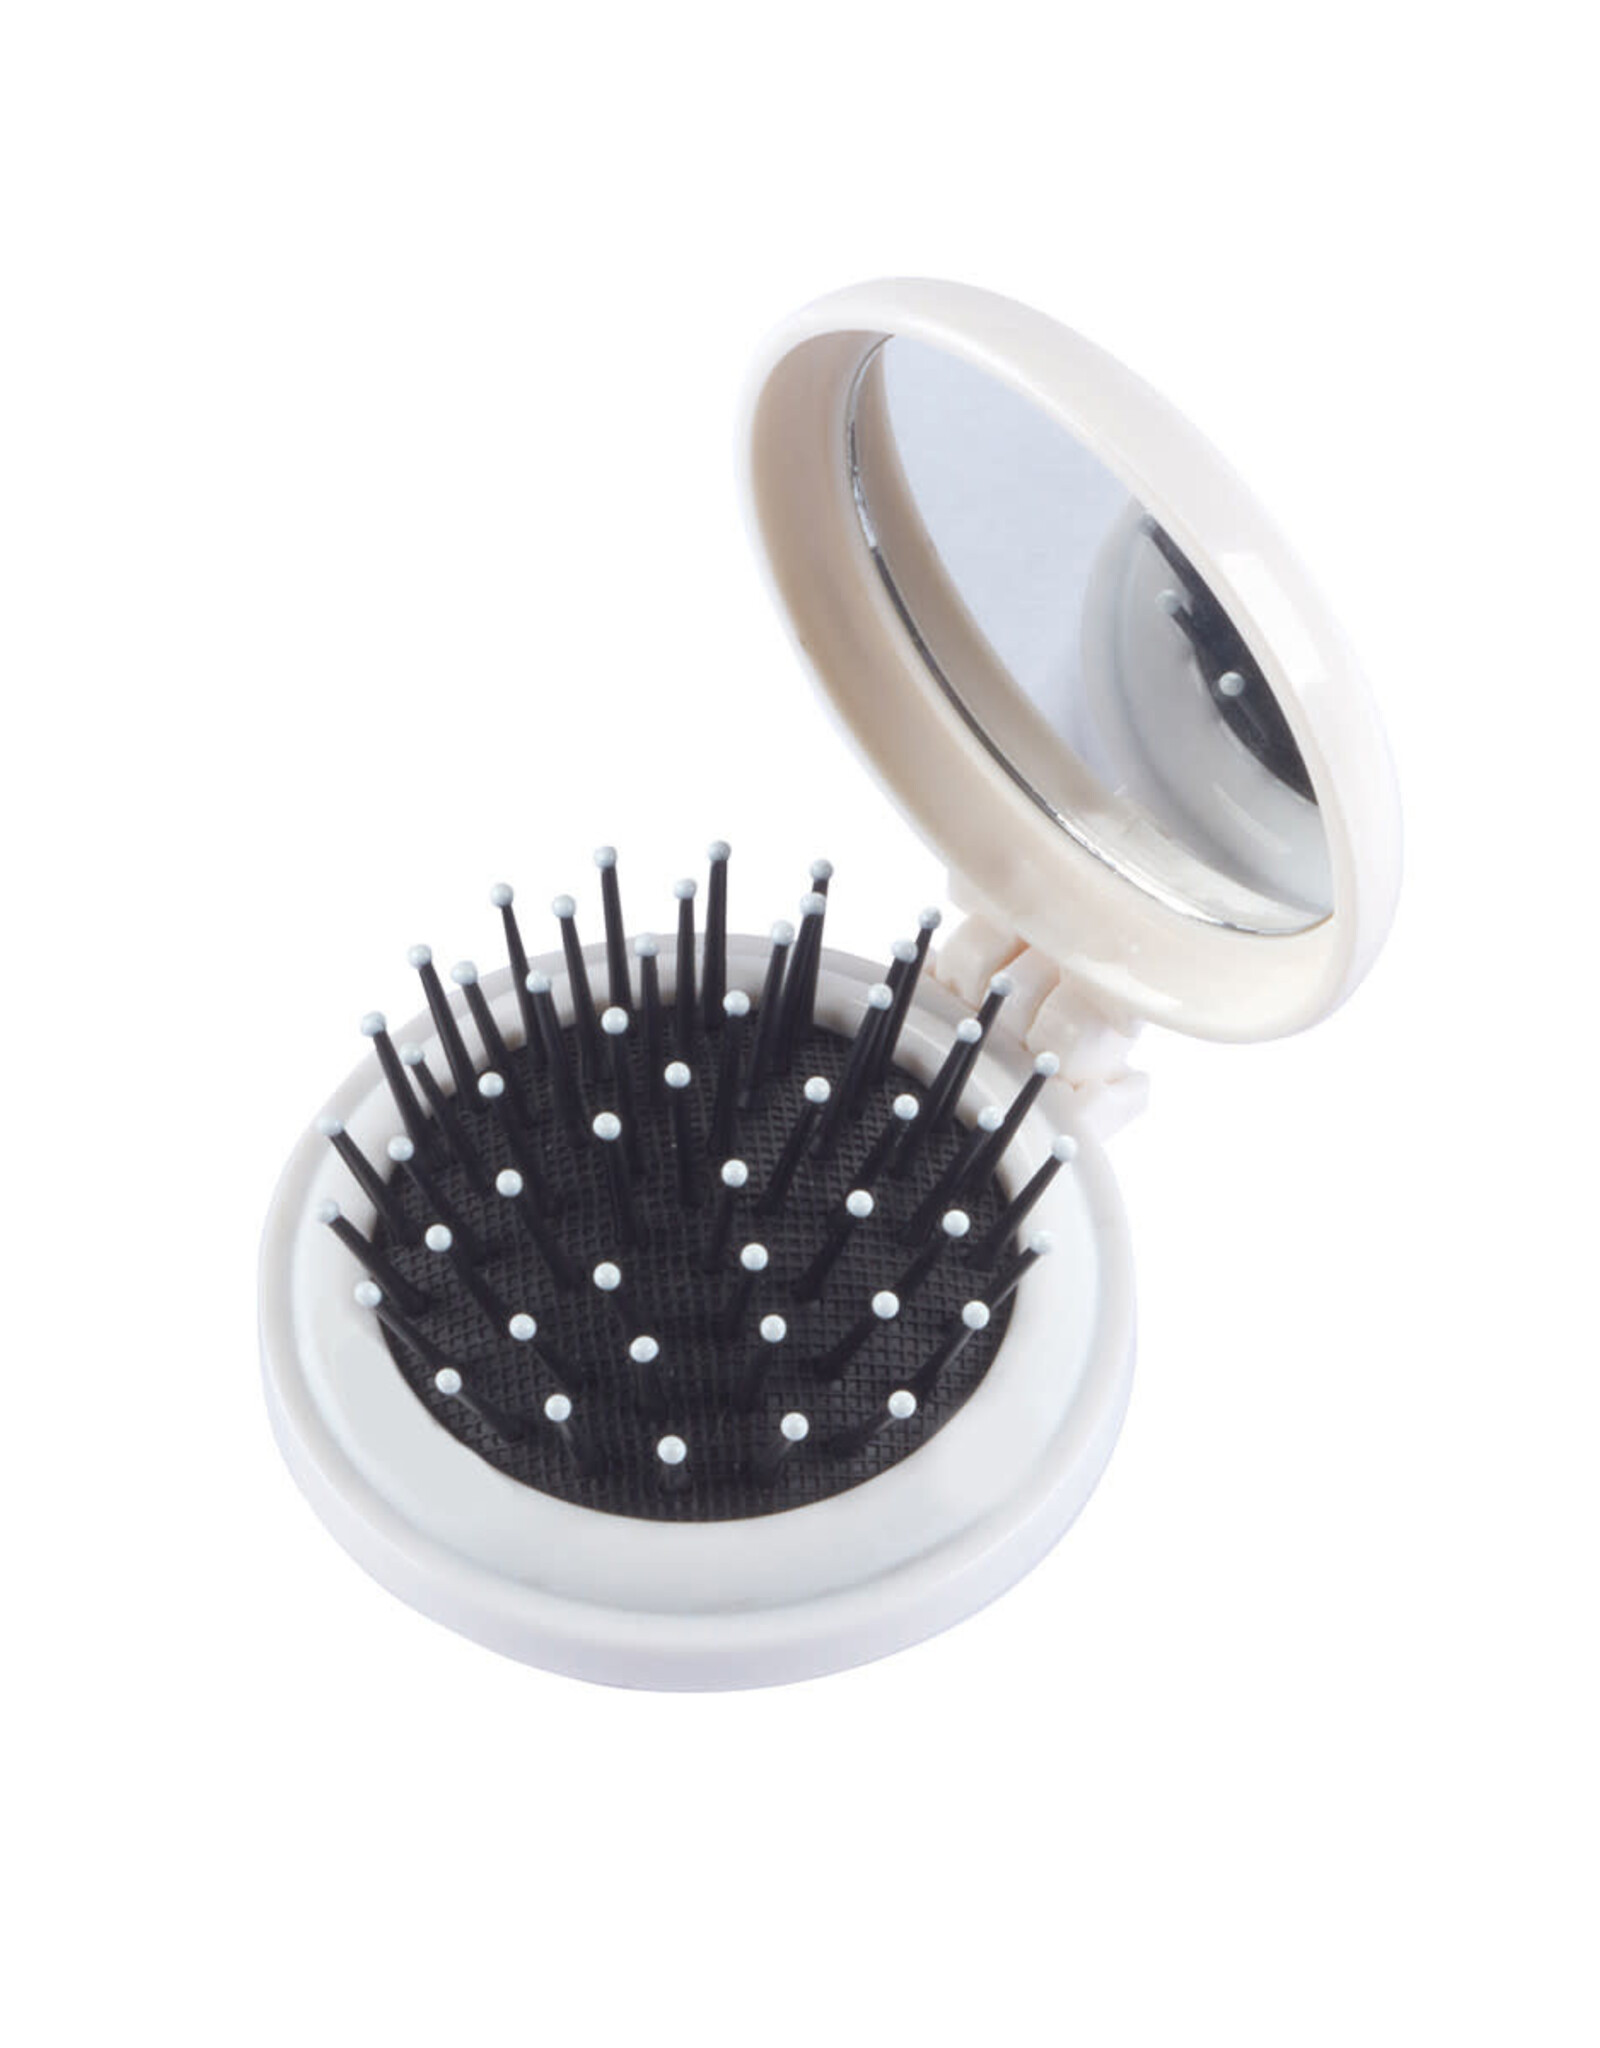 Trefoil Fun Finds Mirror Compact With Hair Brush